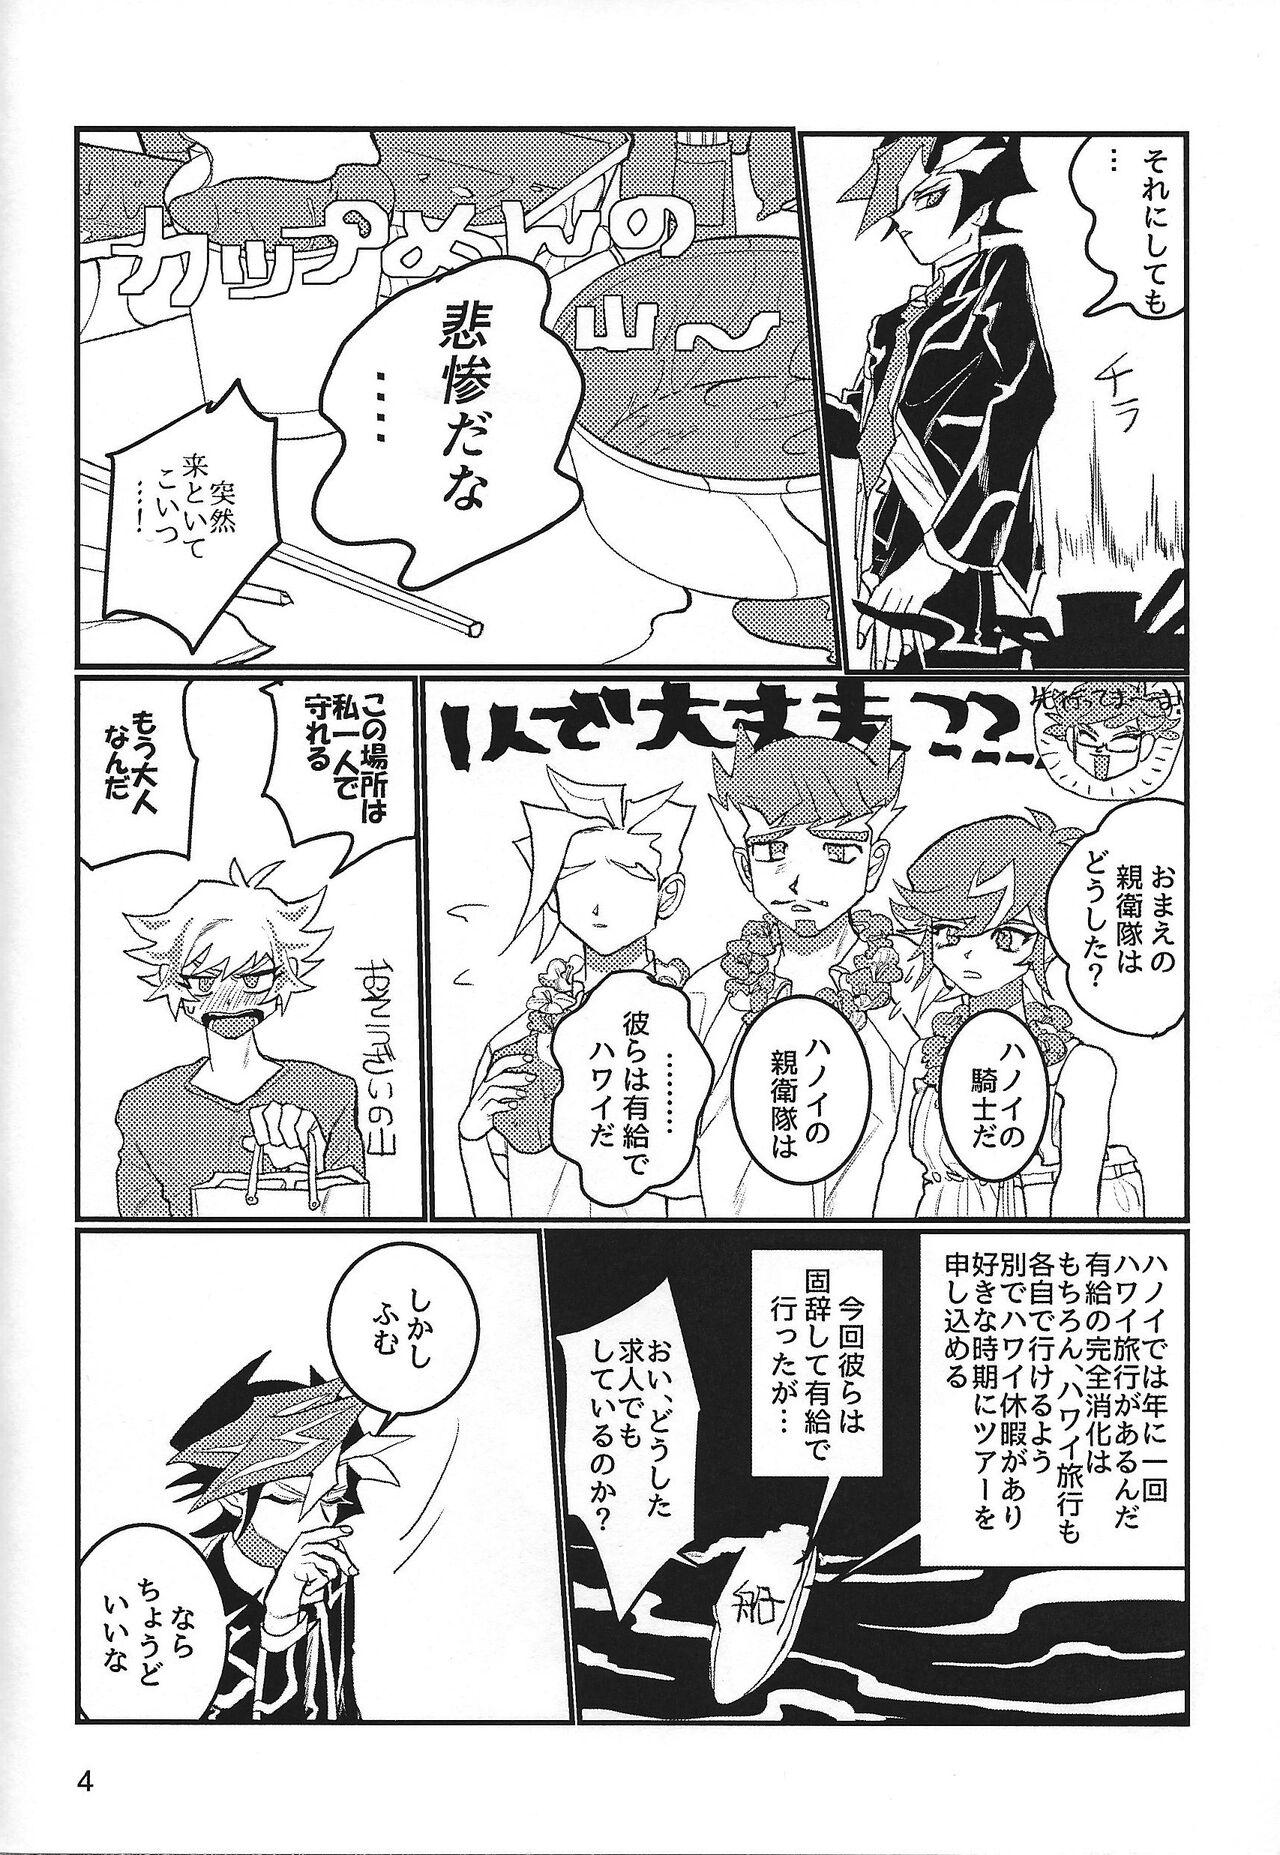 Top LOTUS - Yu-gi-oh vrains Domination - Page 5